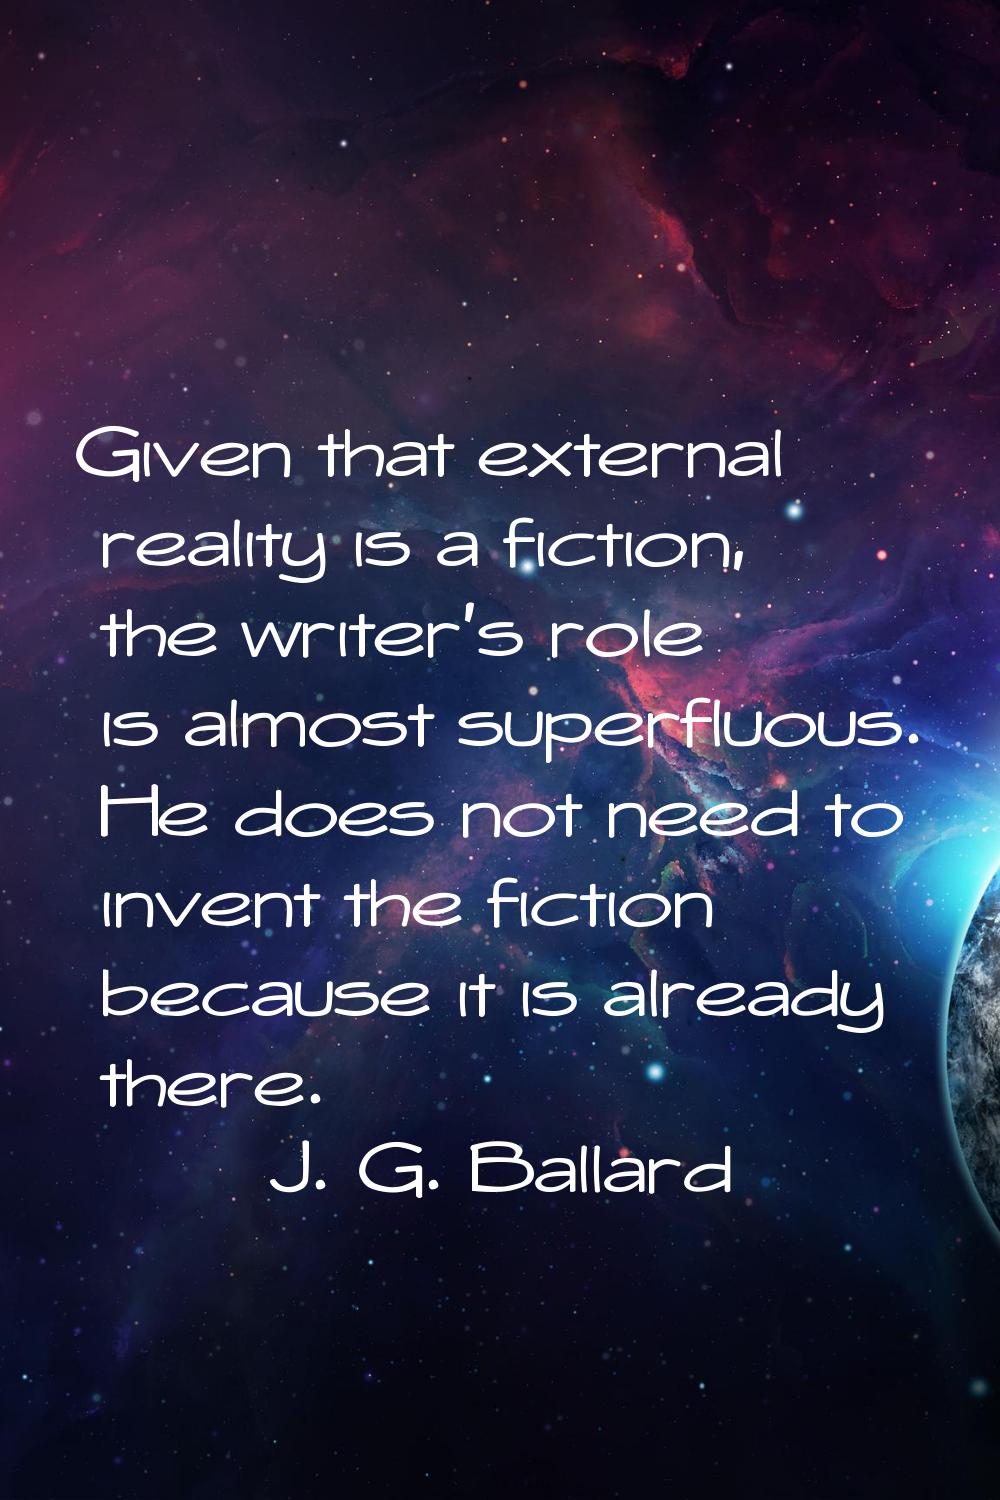 Given that external reality is a fiction, the writer's role is almost superfluous. He does not need